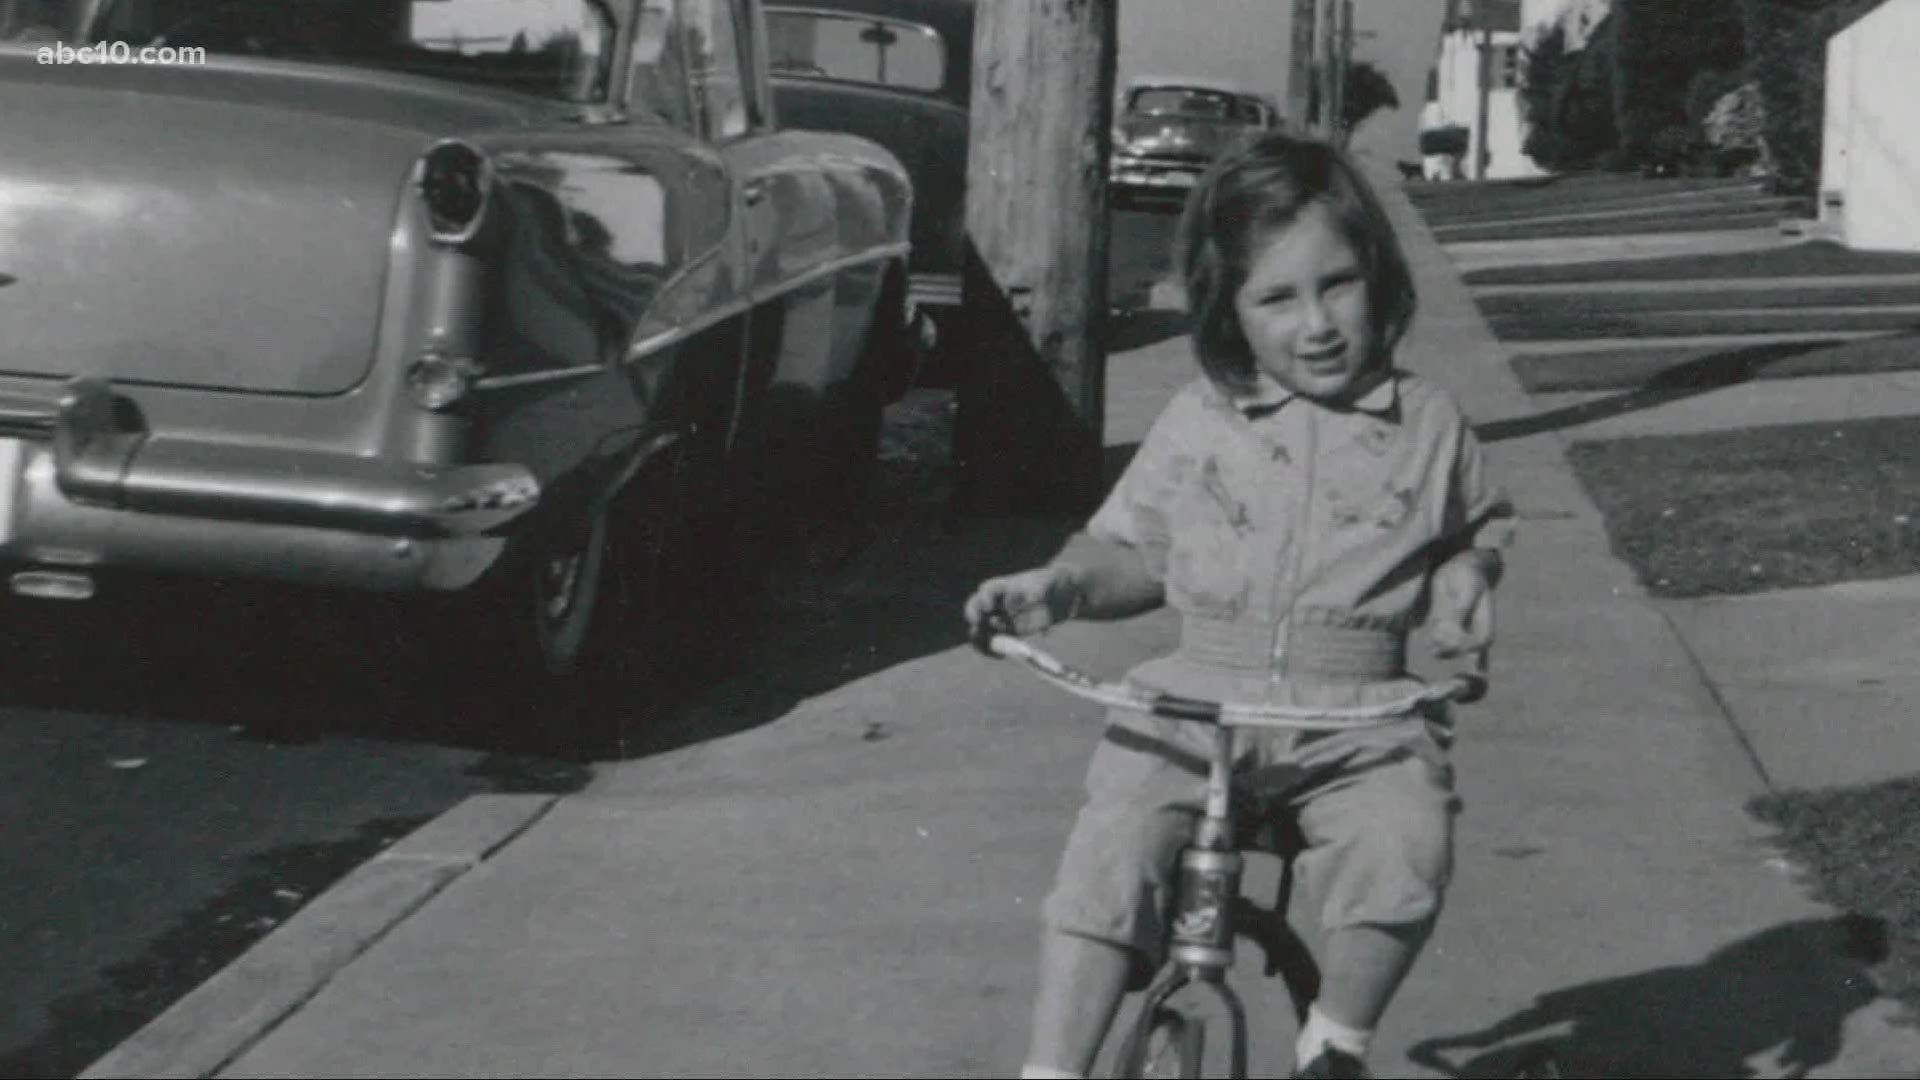 ABC10 viewers share photos and videos of their first bikes. If you want to join the ABC10 first club, share a photo of your first bike on the ABC10 app.